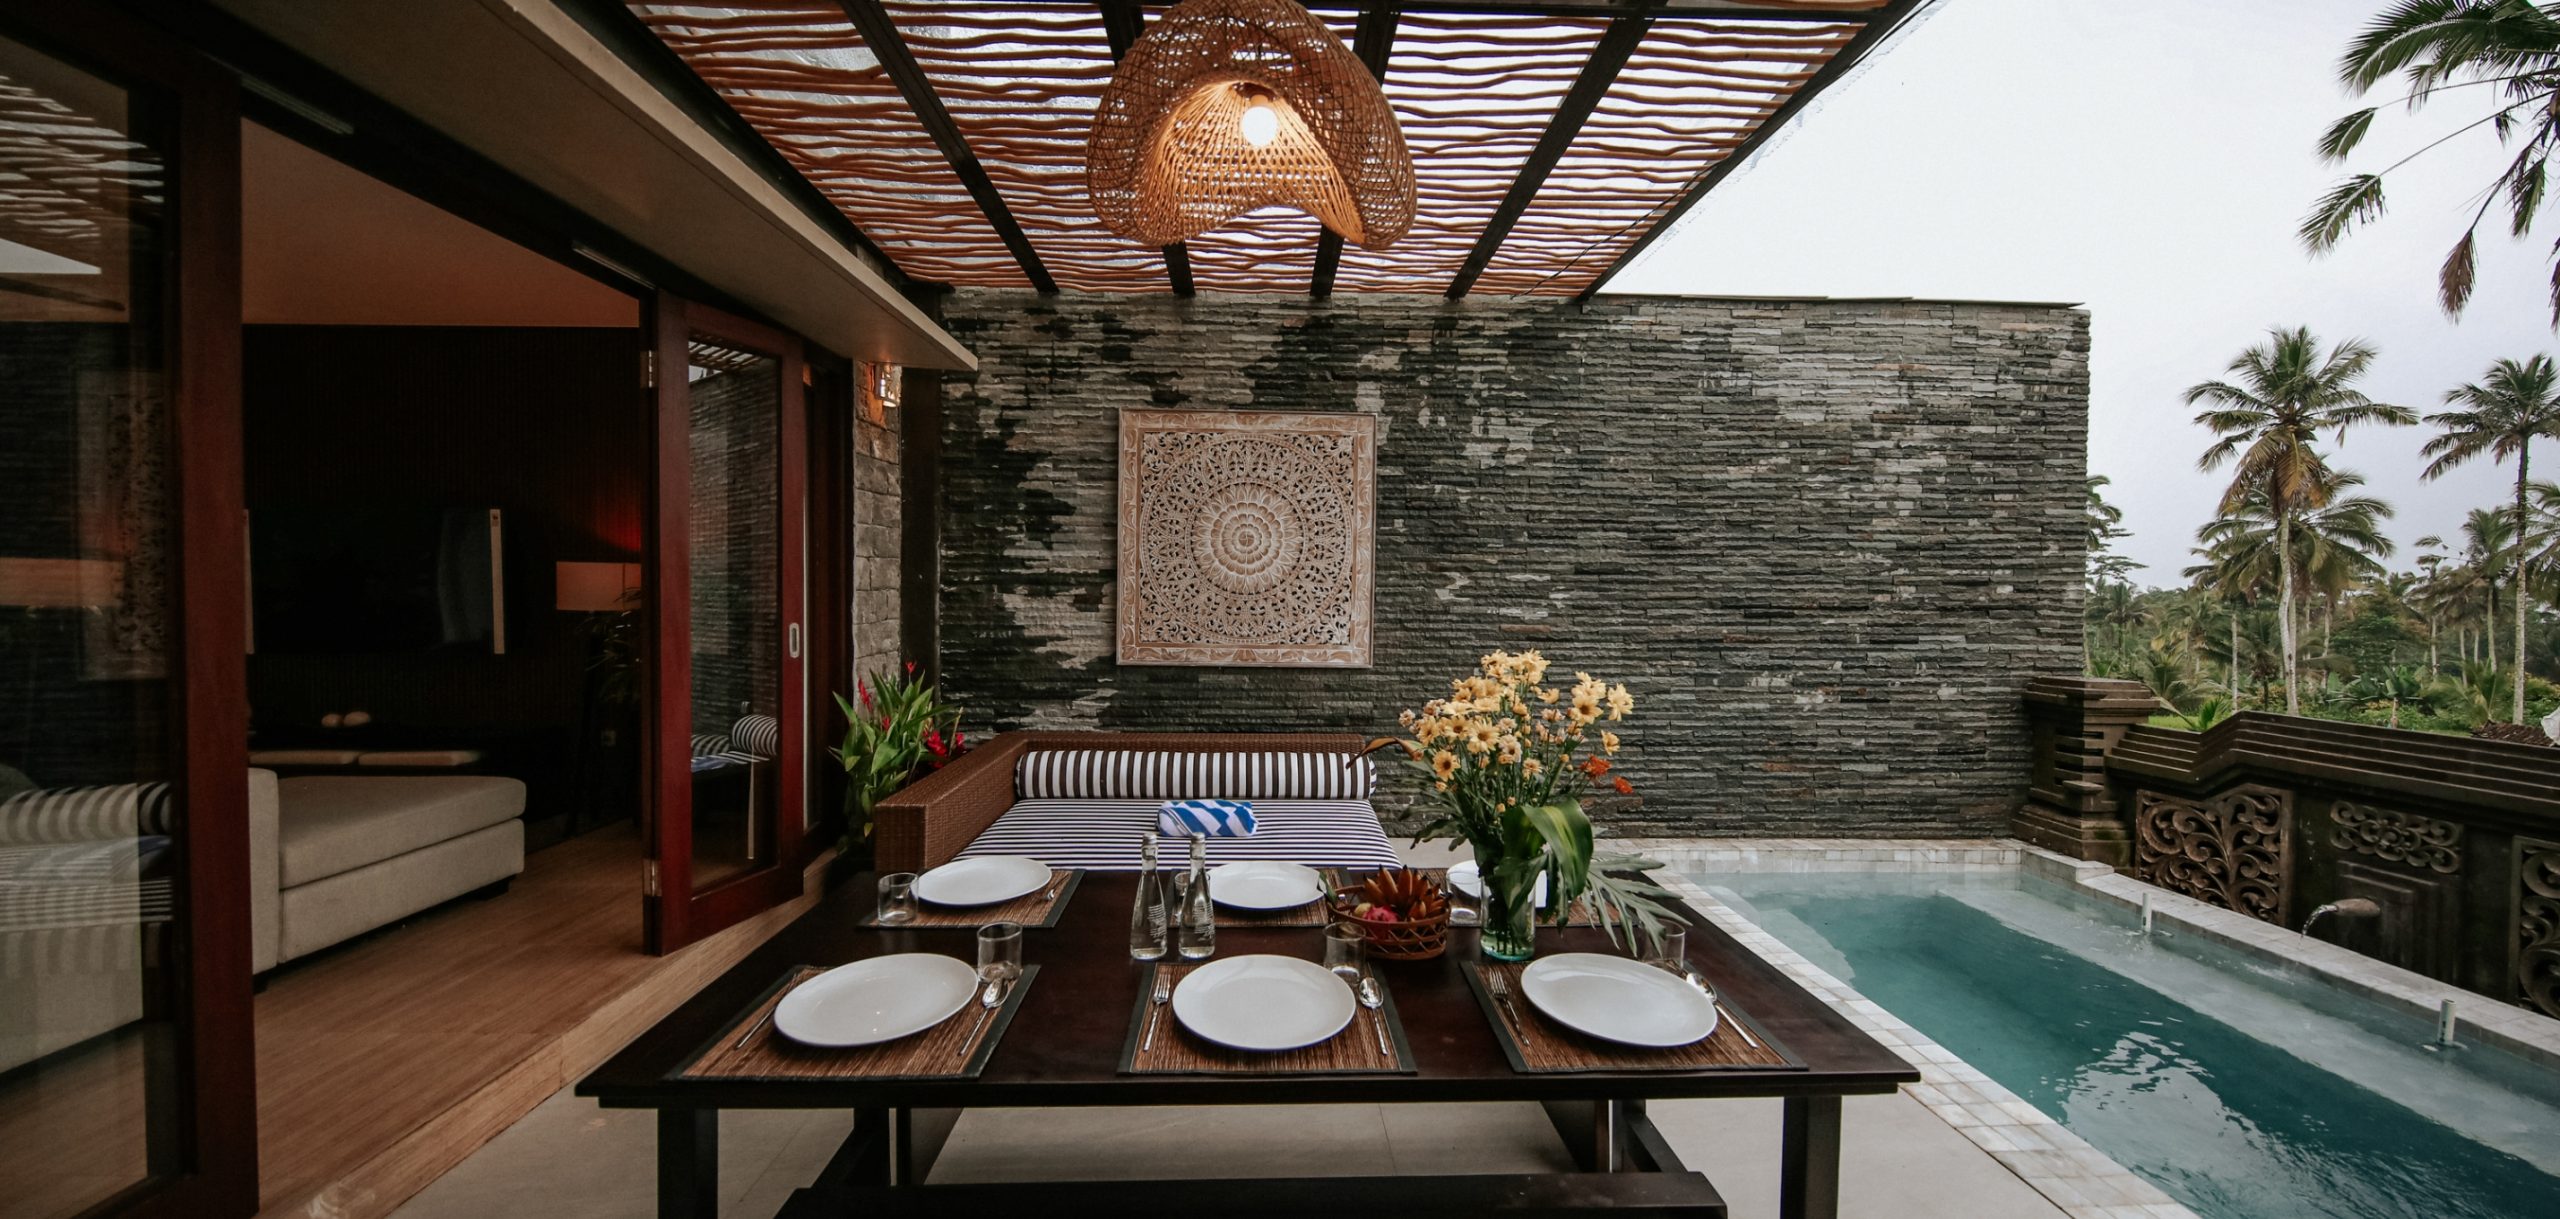 Extended outdoor living with Skylight Patio & Al-fresco Dining